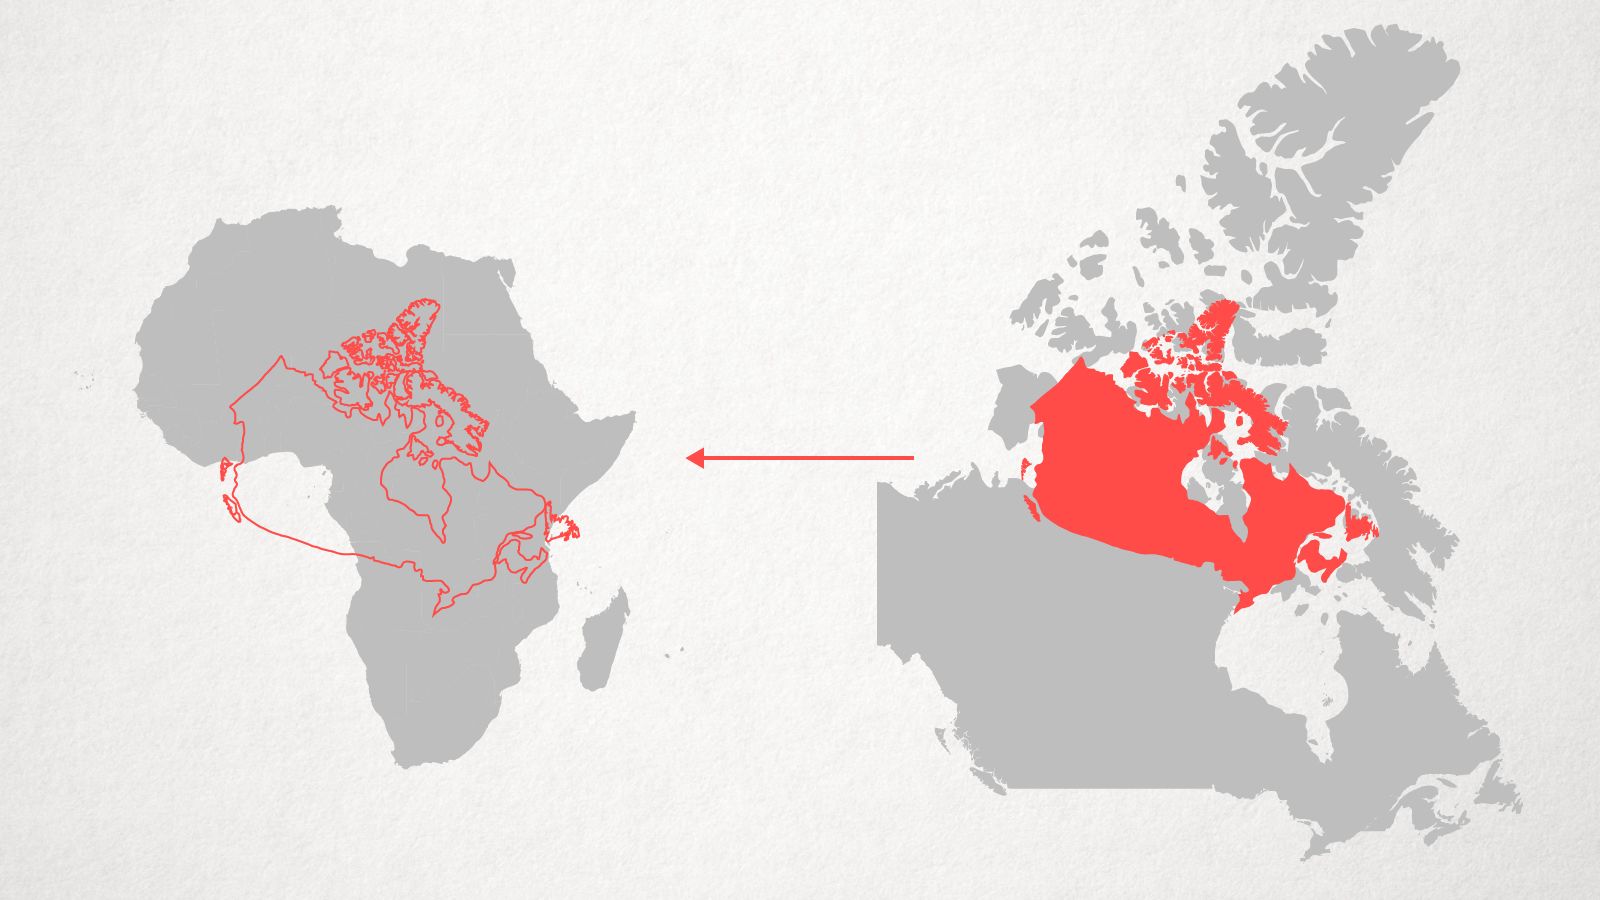 Realistic Country Shapes  What Countries Look Like 